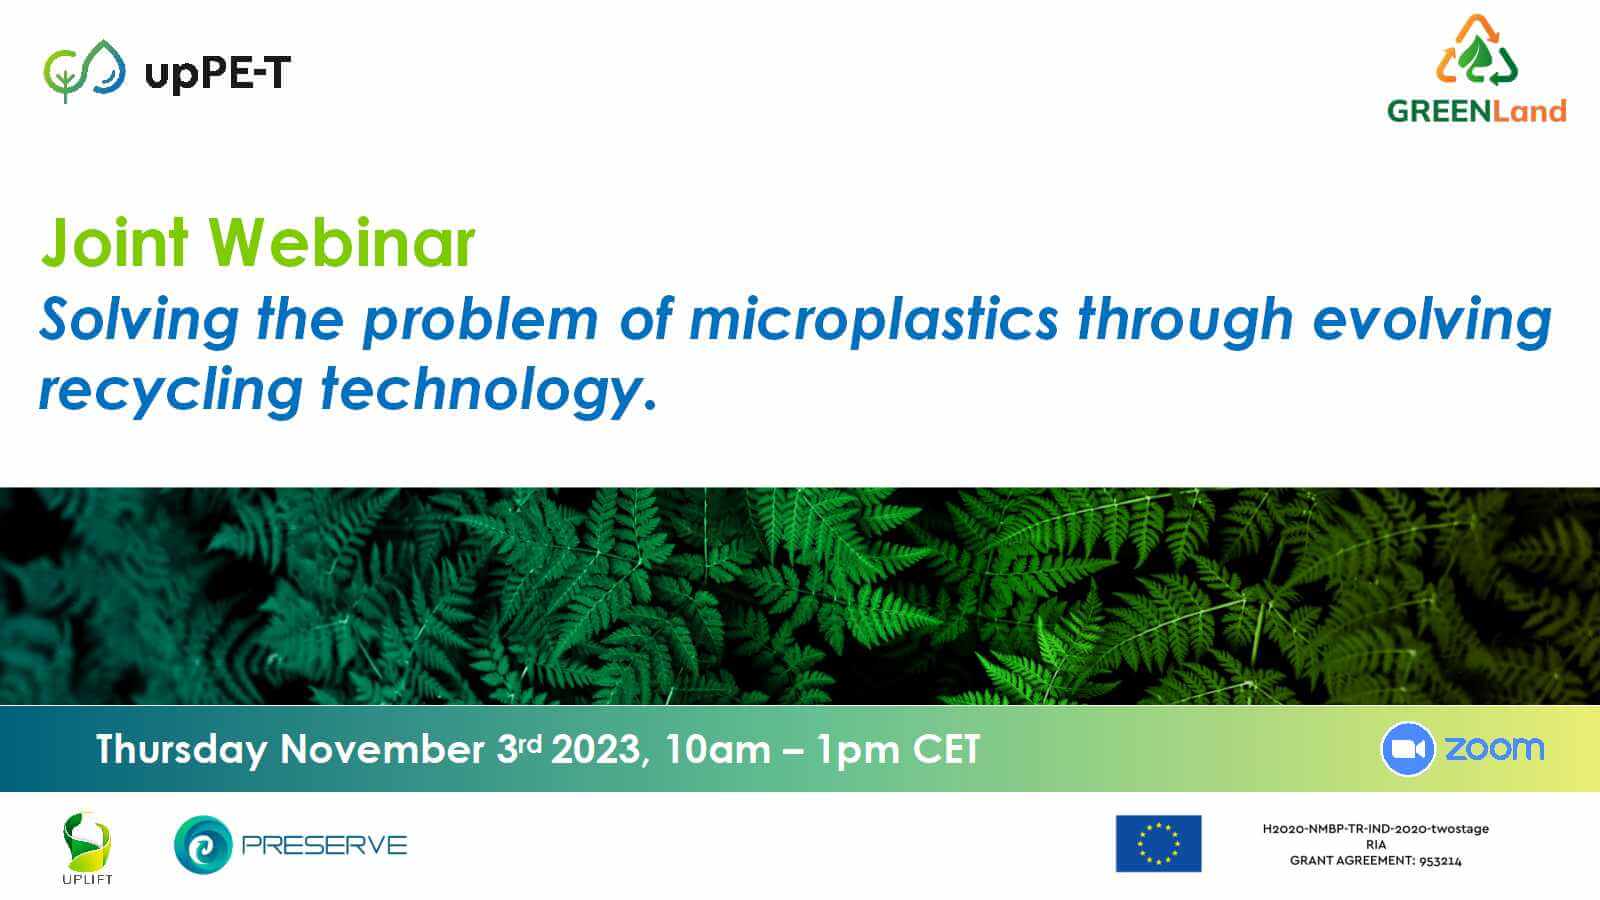 Solving the problem of microplastics through evolving recycling technology event banner